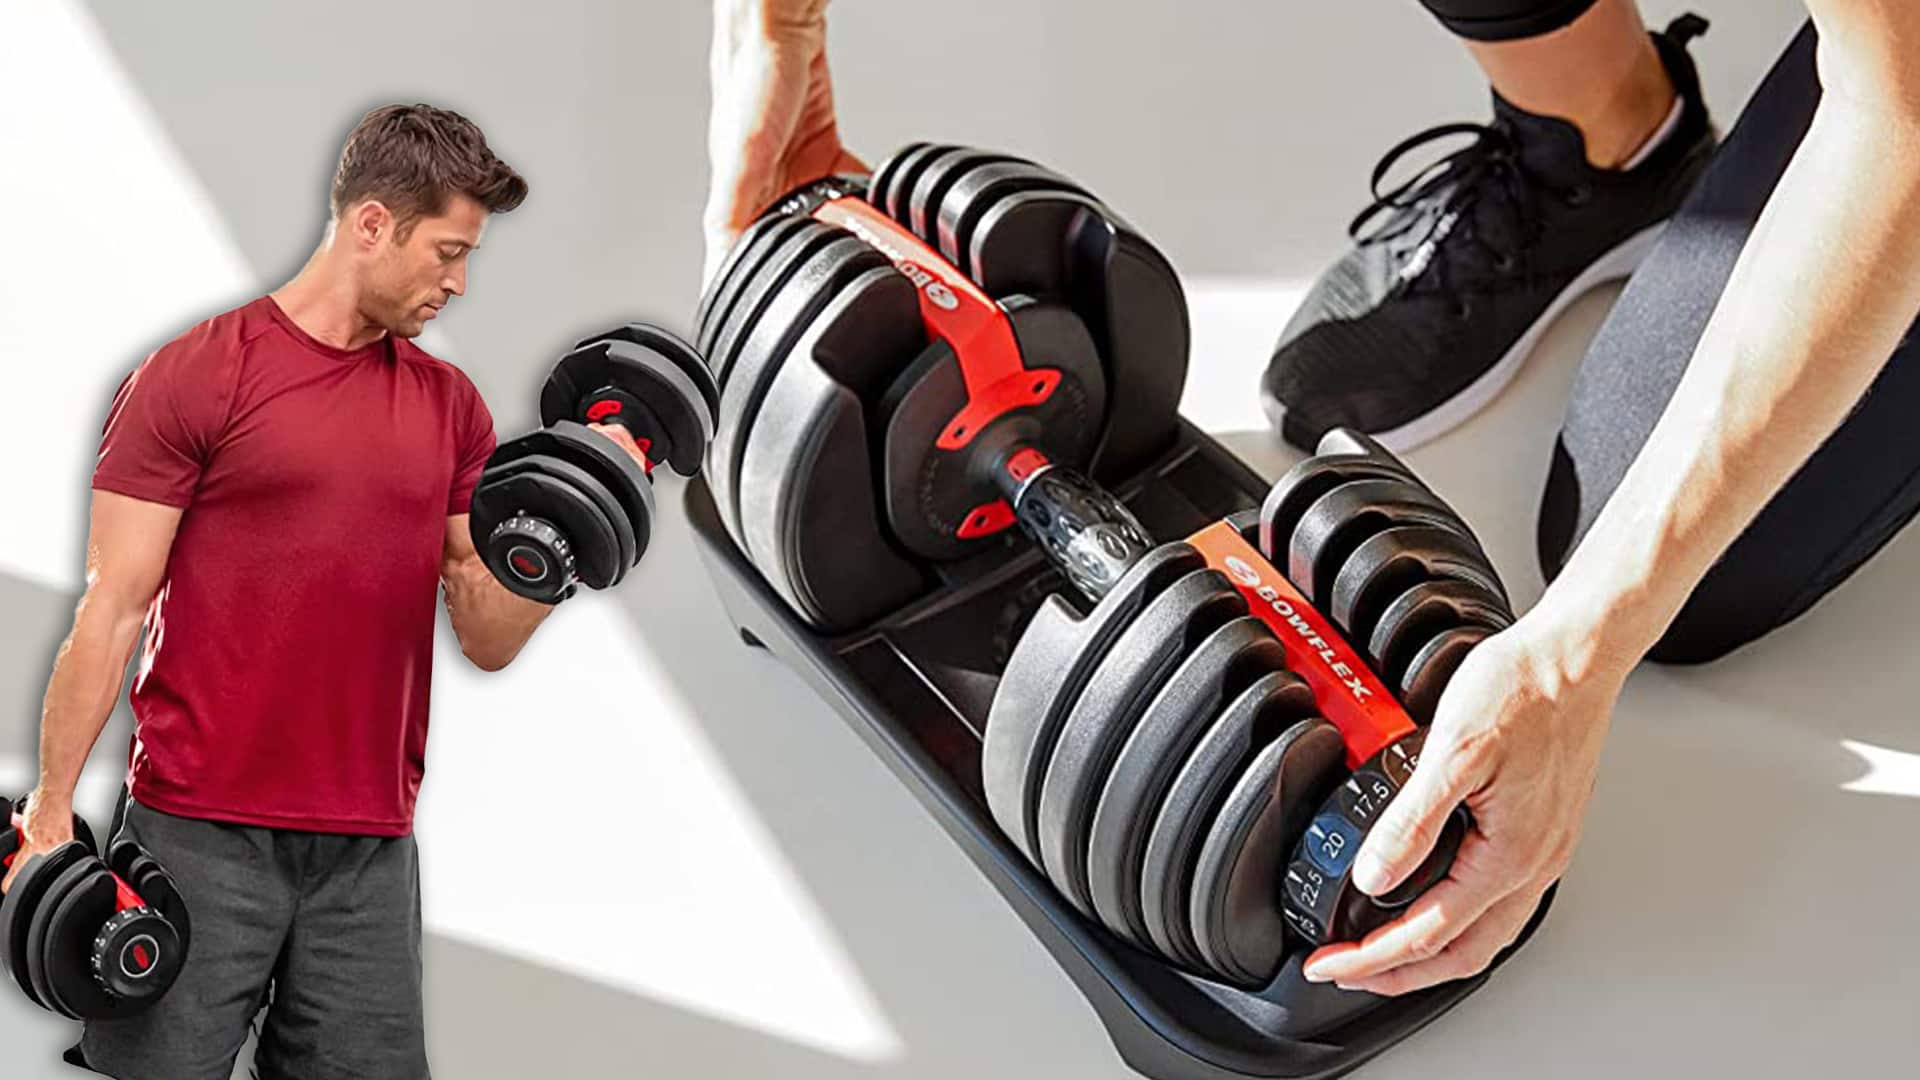 Bowflex SelectTech 552 Adjustable Dumbbell in use